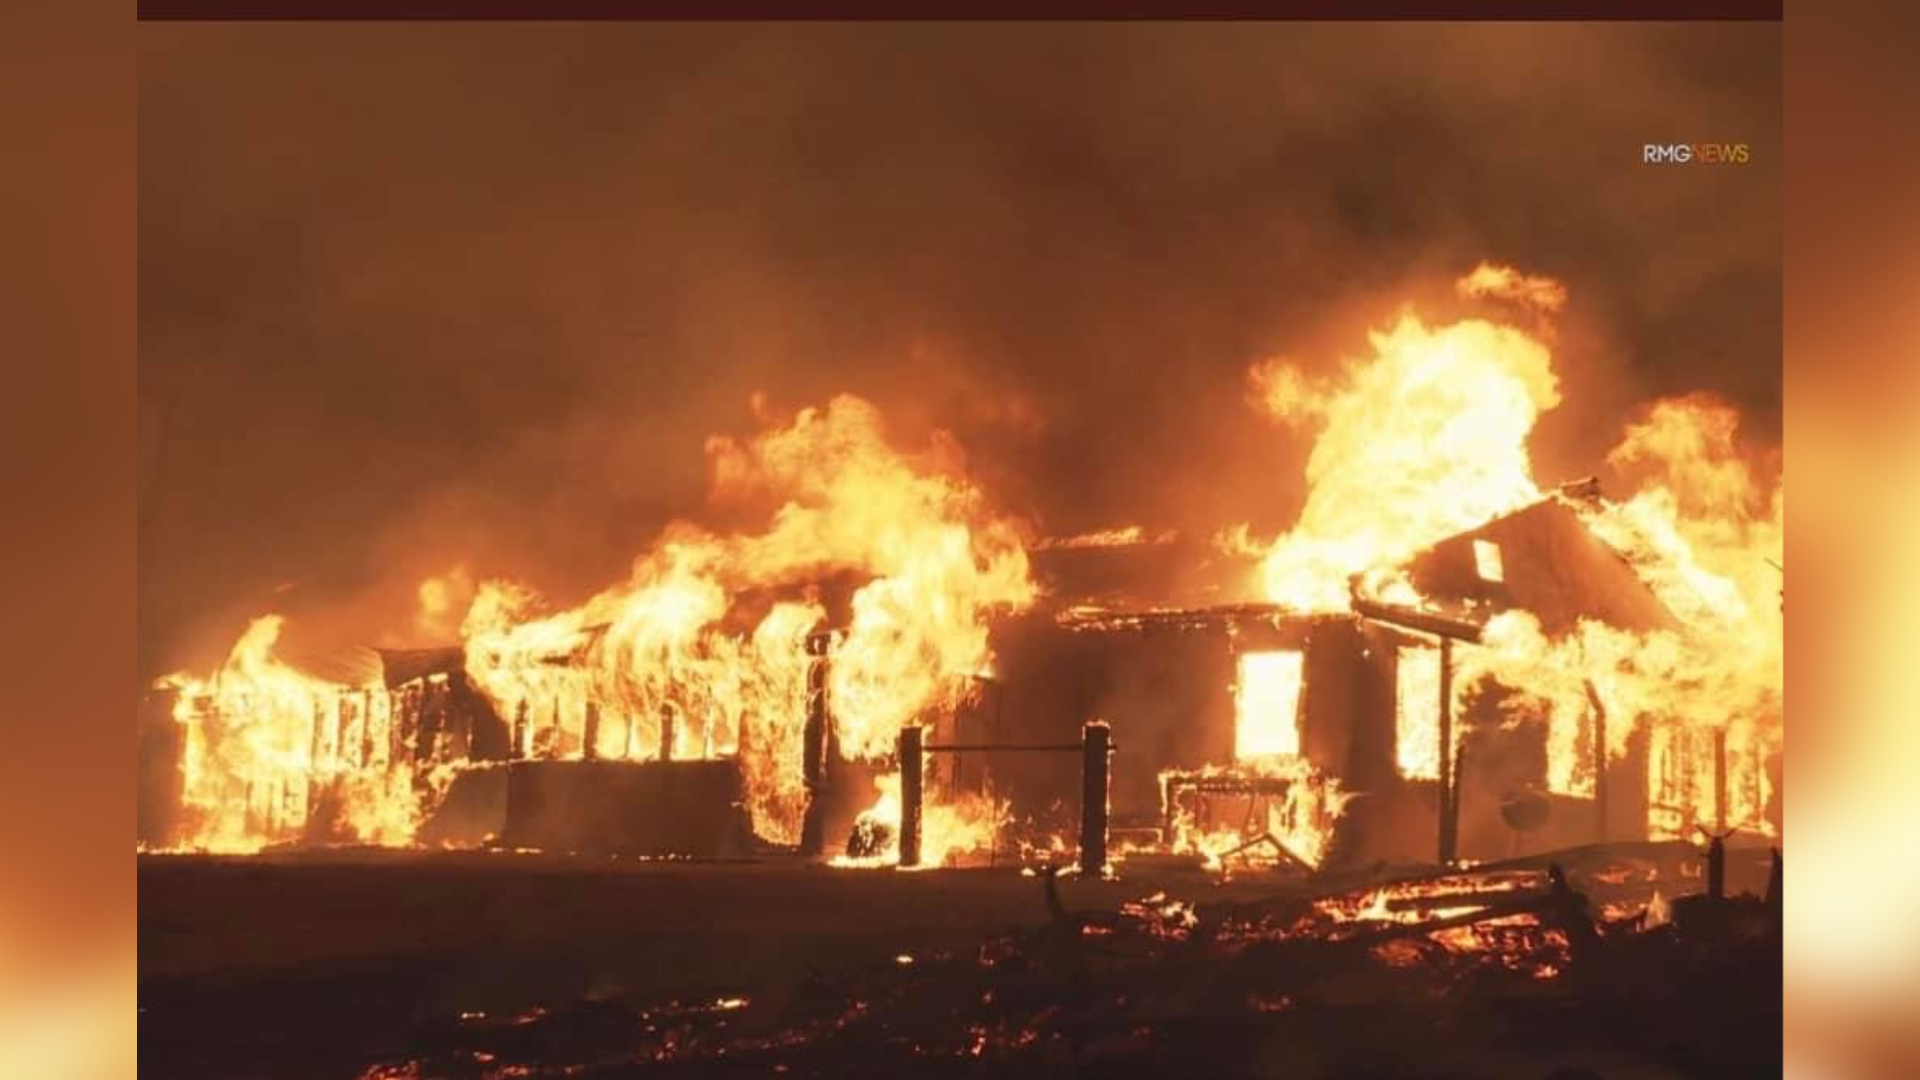 Mariposa Officer House Burns Down While Working Fire